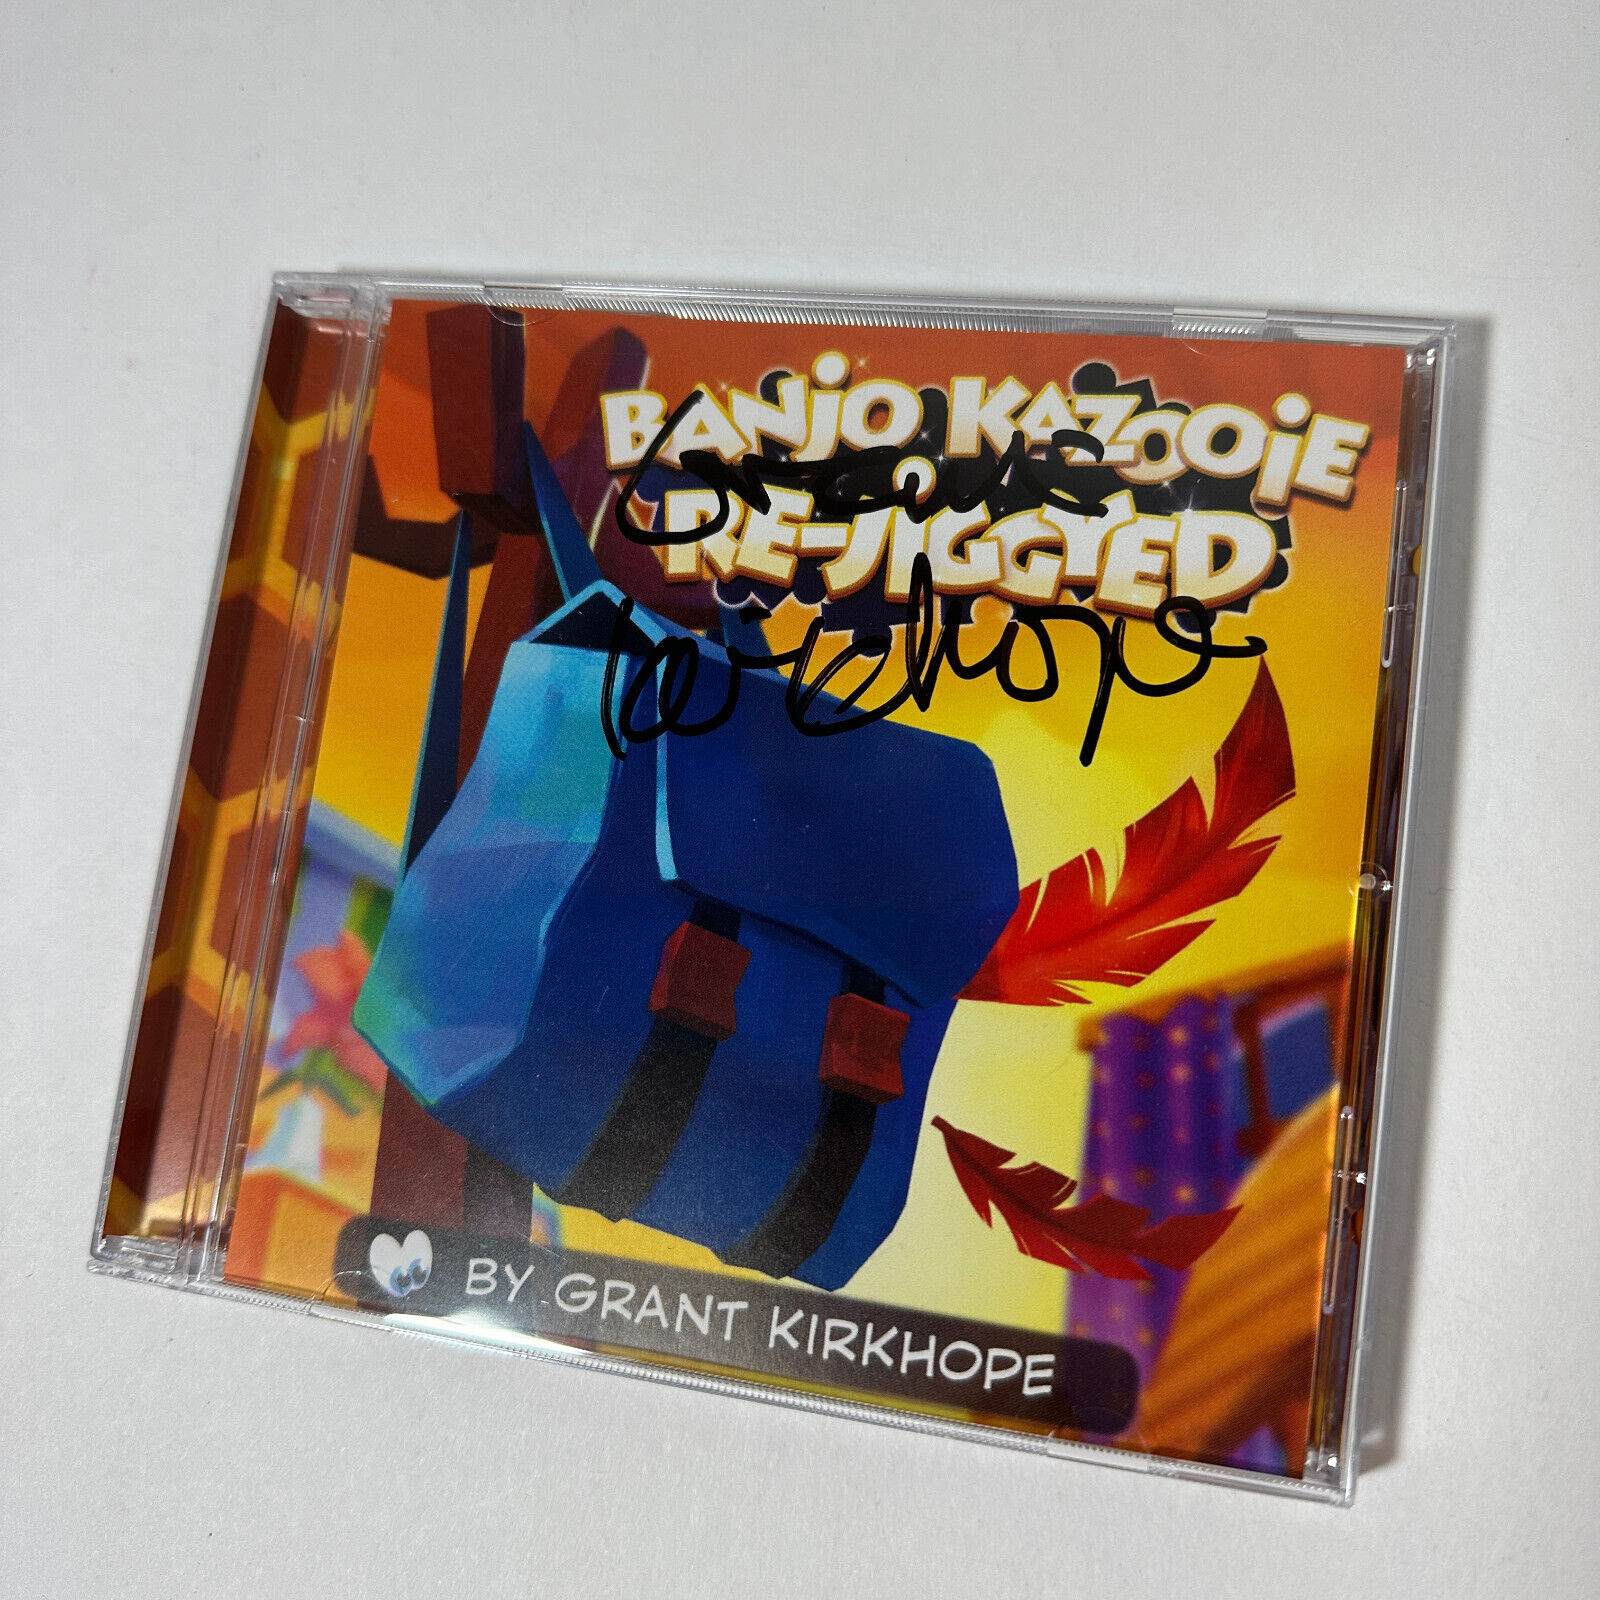 Banjo Kazooie Re-Jiggyed Limited Edition CD --- SIGNED by Grant Kirkhope